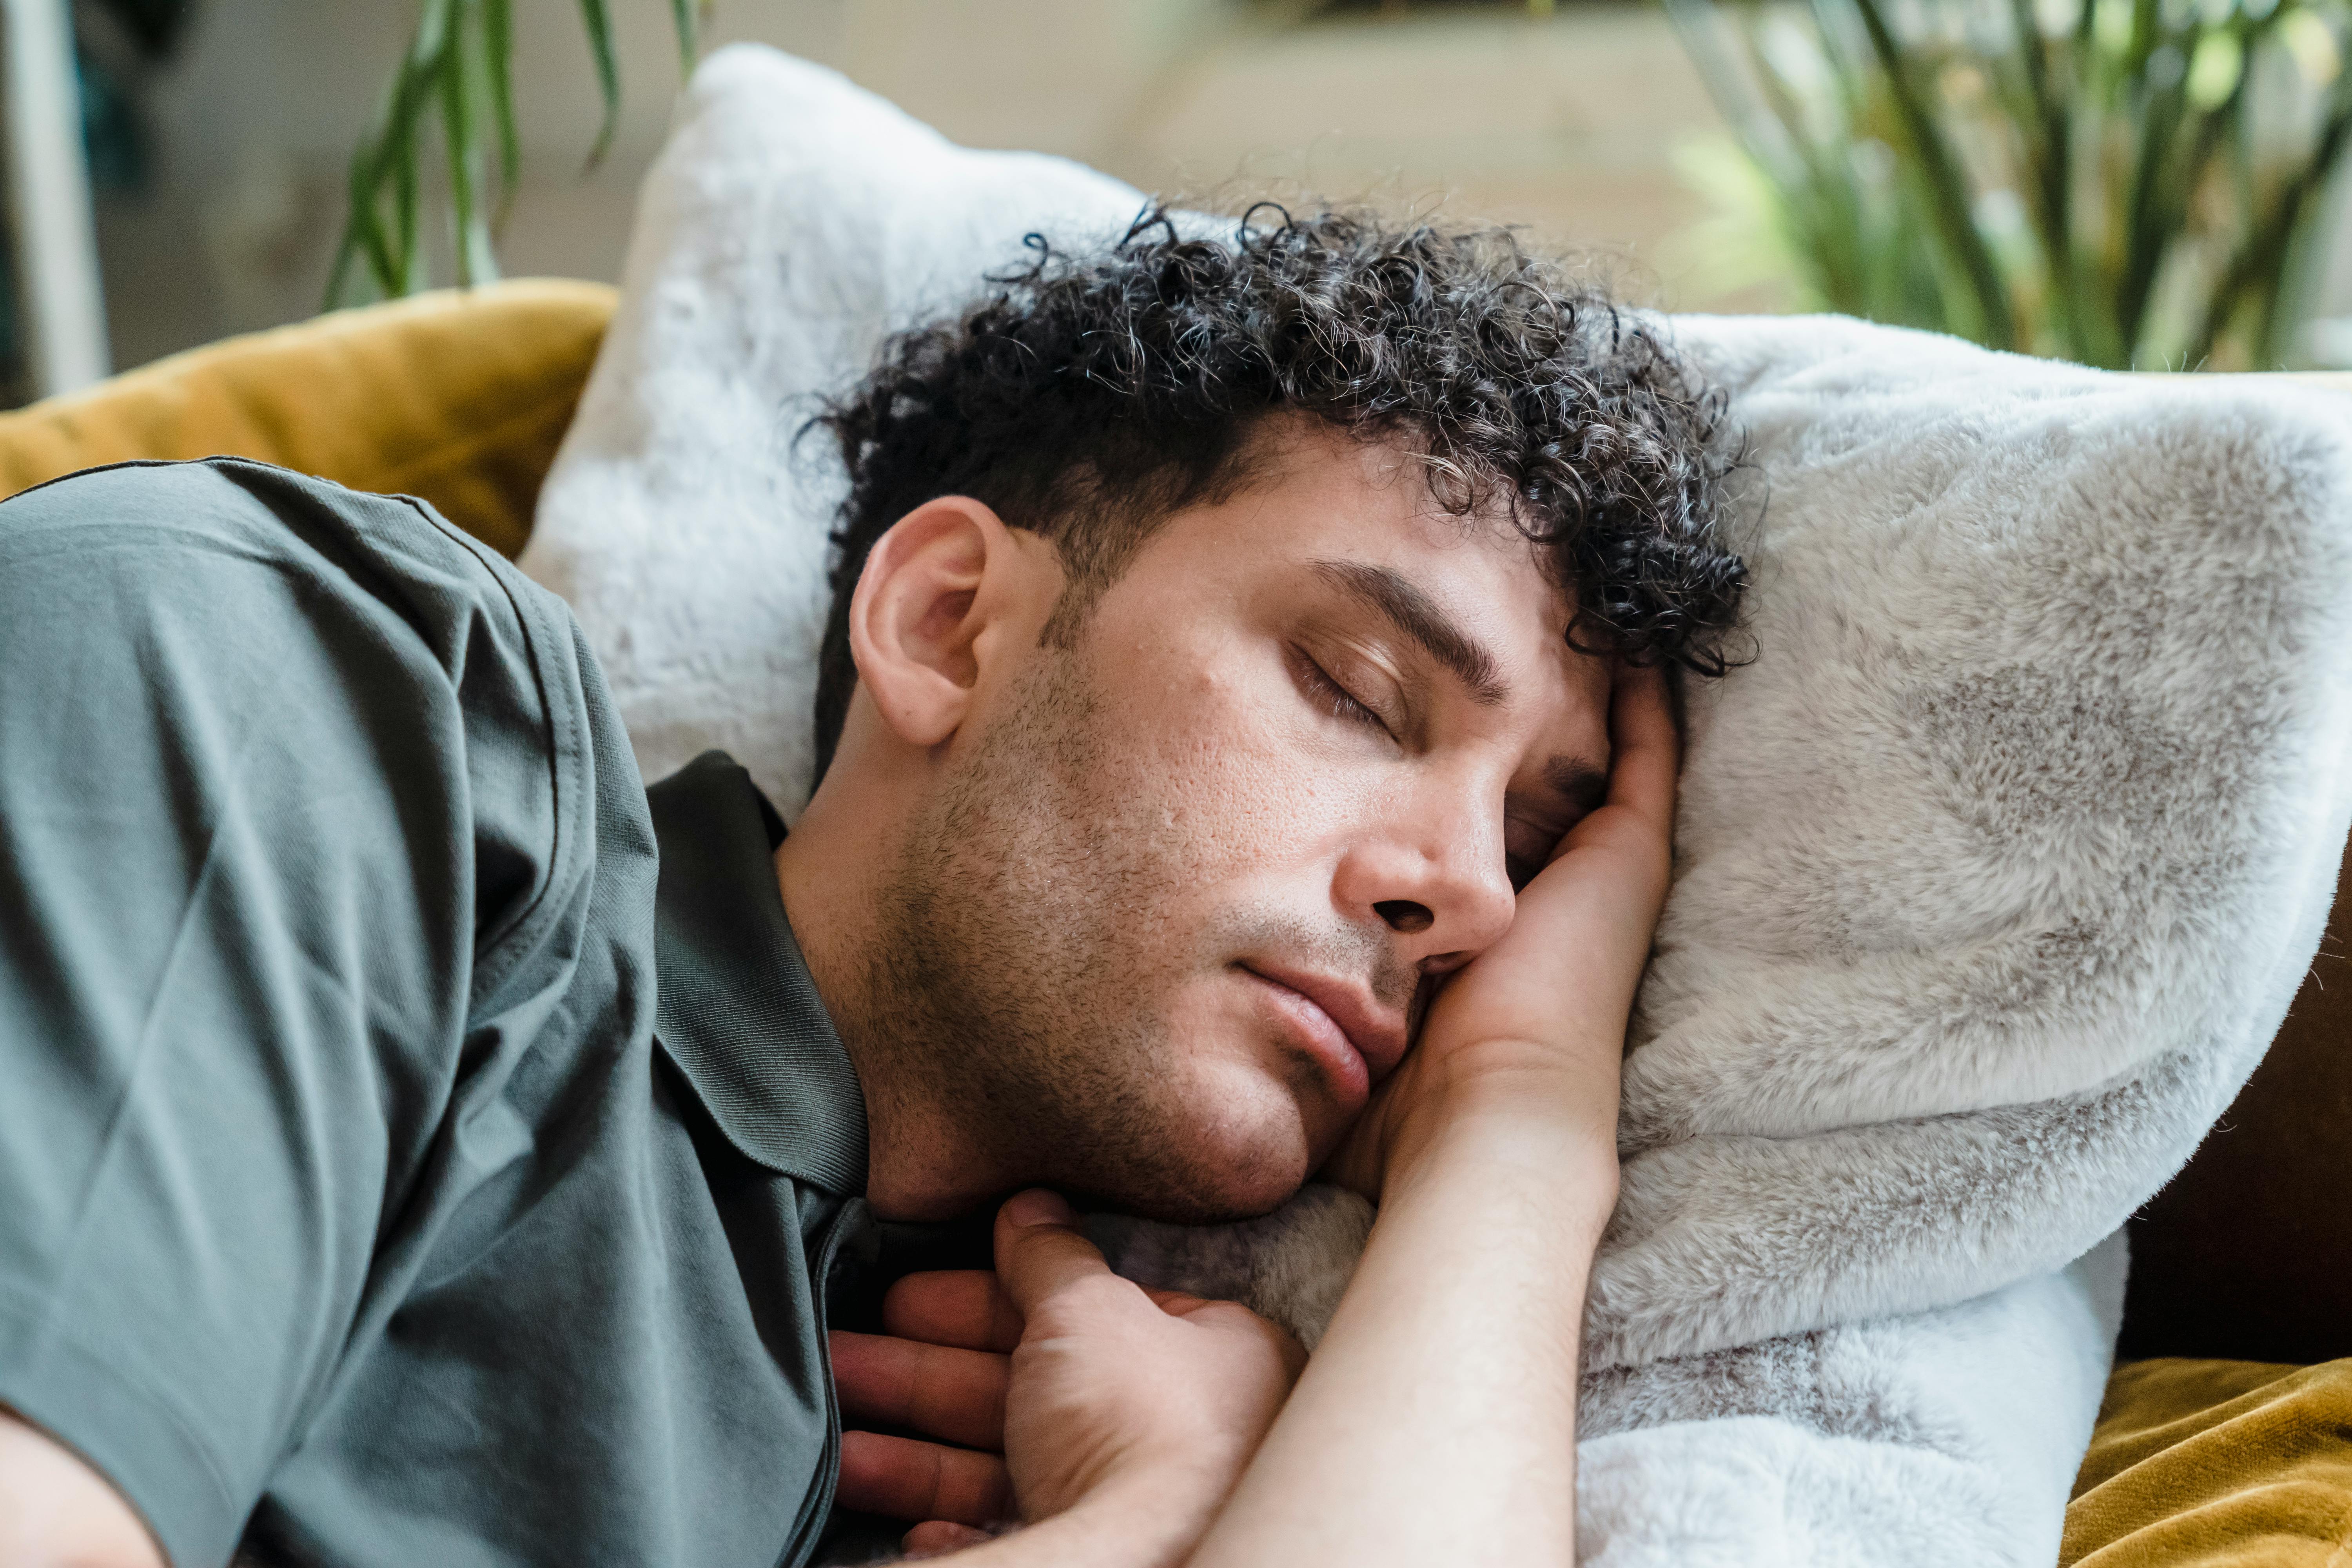 A close-up of a young man sleeping | Source: Pexels